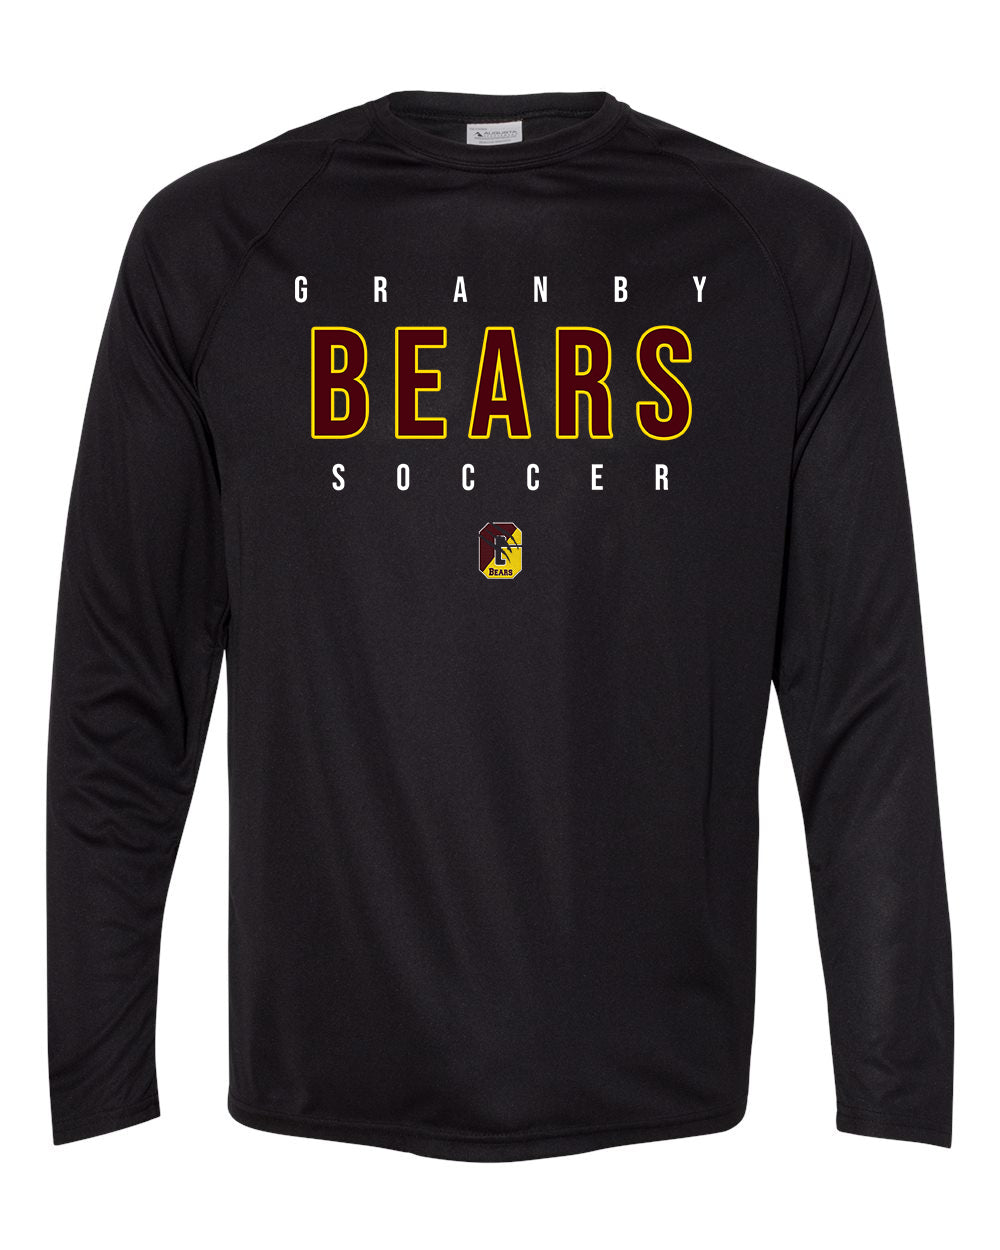 Granby Girls Soccer Longsleeve Tech Shirt - 2795 (color options available)